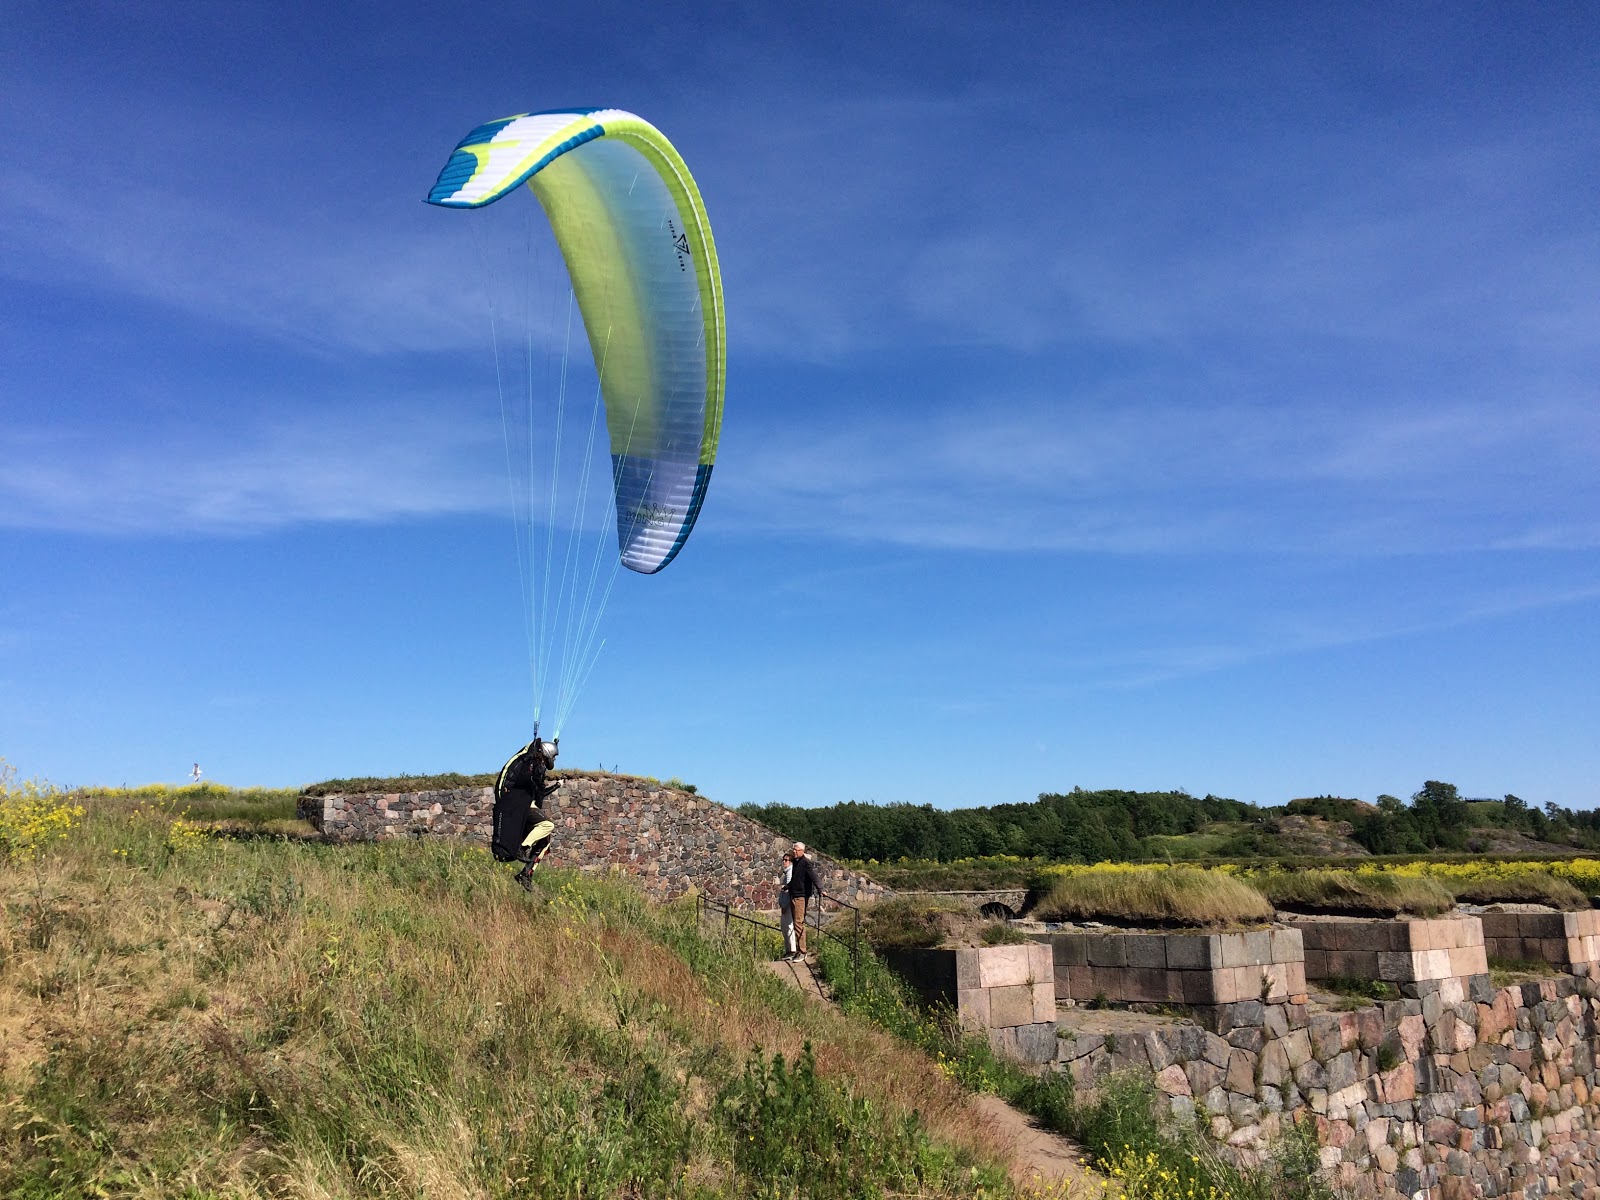 Extremely limited paragliding terrain on Suomenlinna